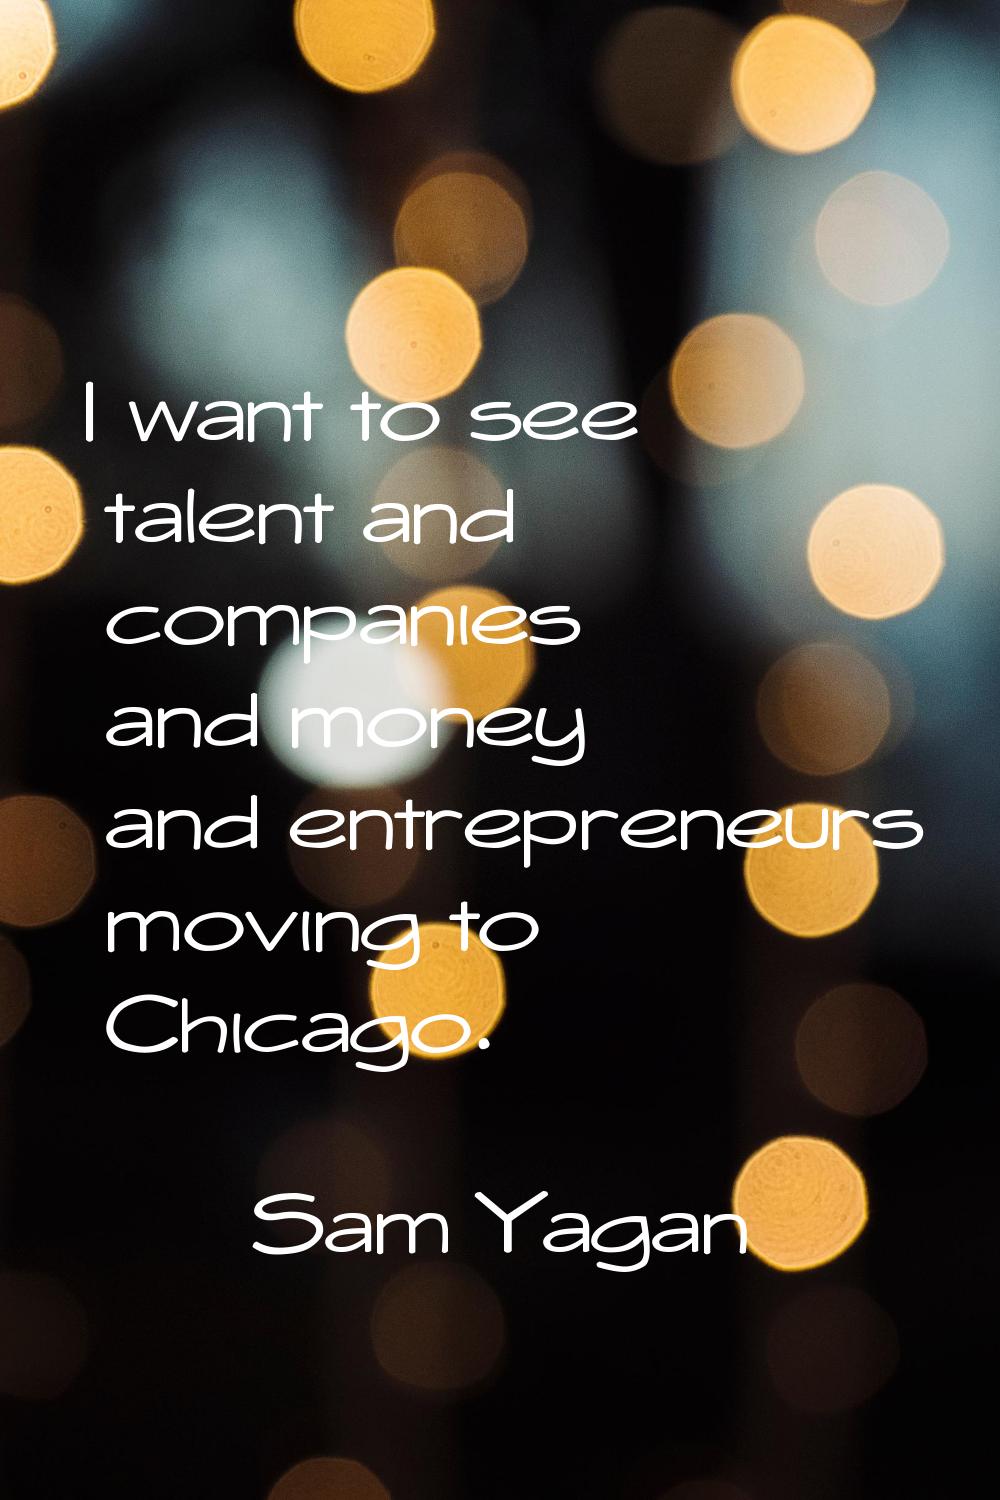 I want to see talent and companies and money and entrepreneurs moving to Chicago.